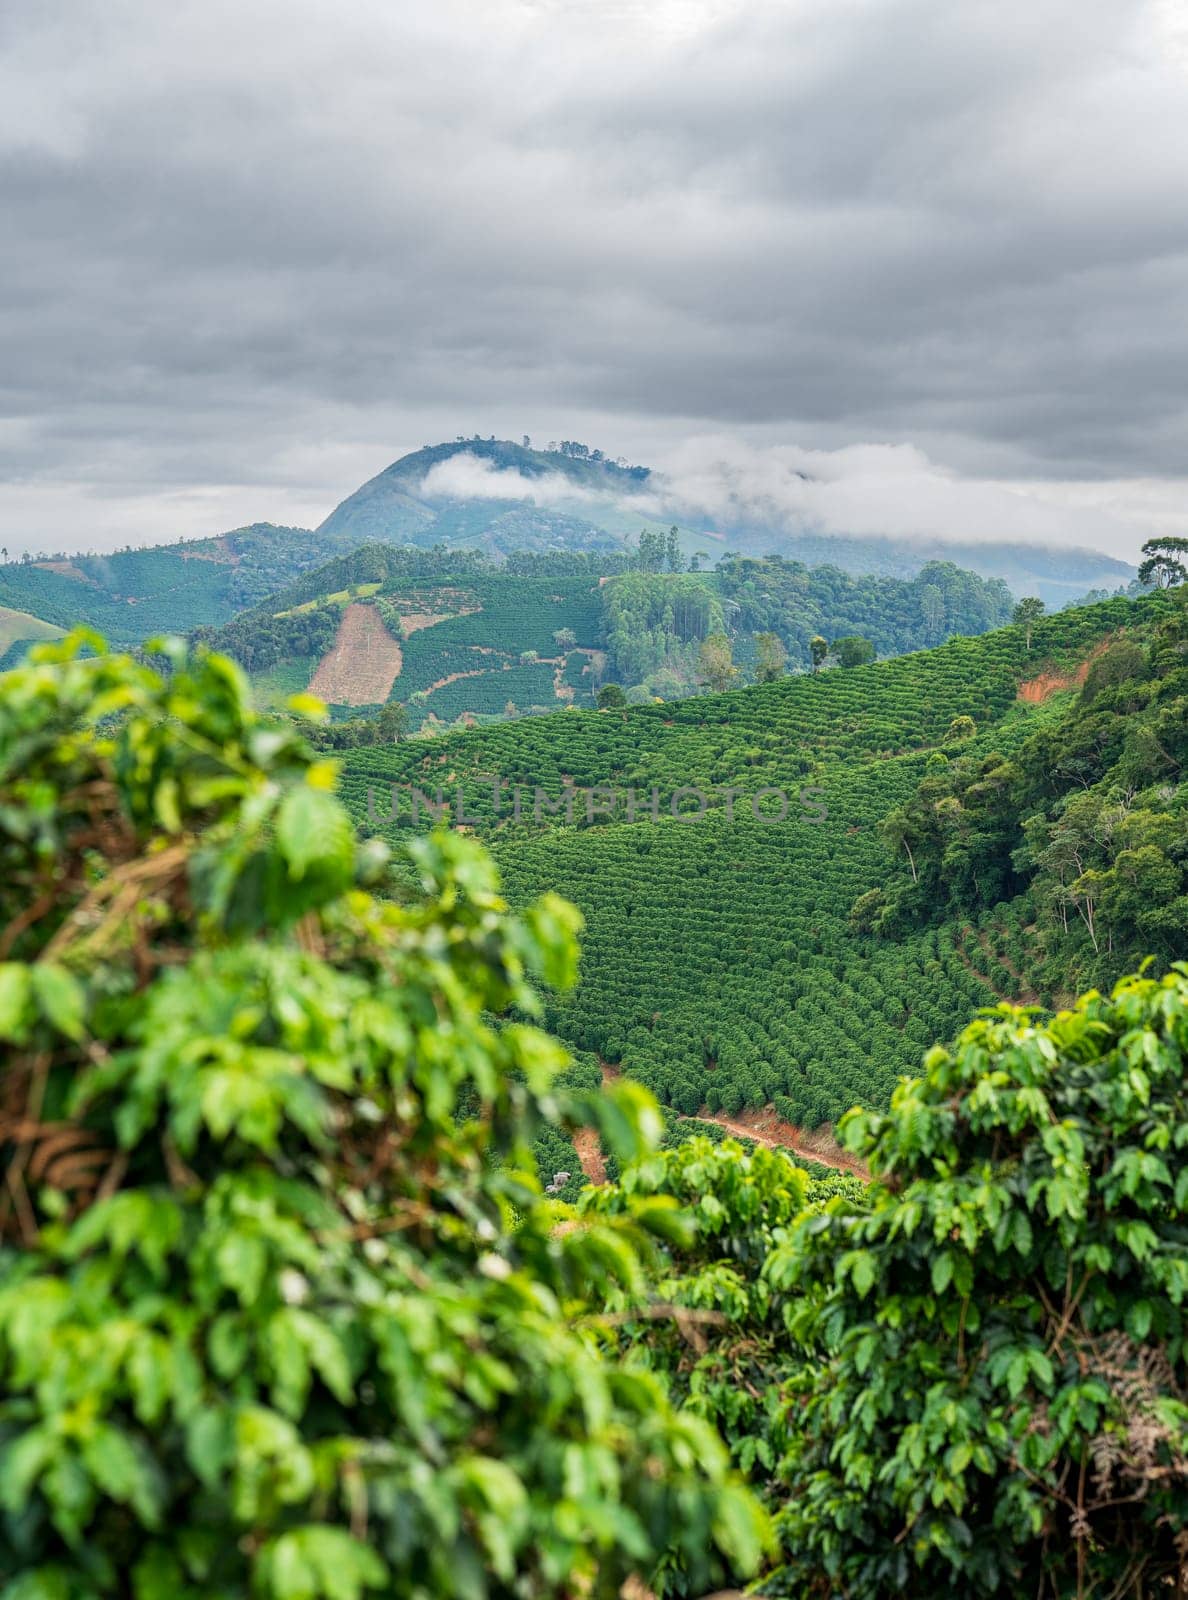 Vast expanse of coffee fields stretching from foreground to horizon, nestled in a mountainous landscape with cloudy skies and mist. Ideal for coffee lovers and nature enthusiasts.